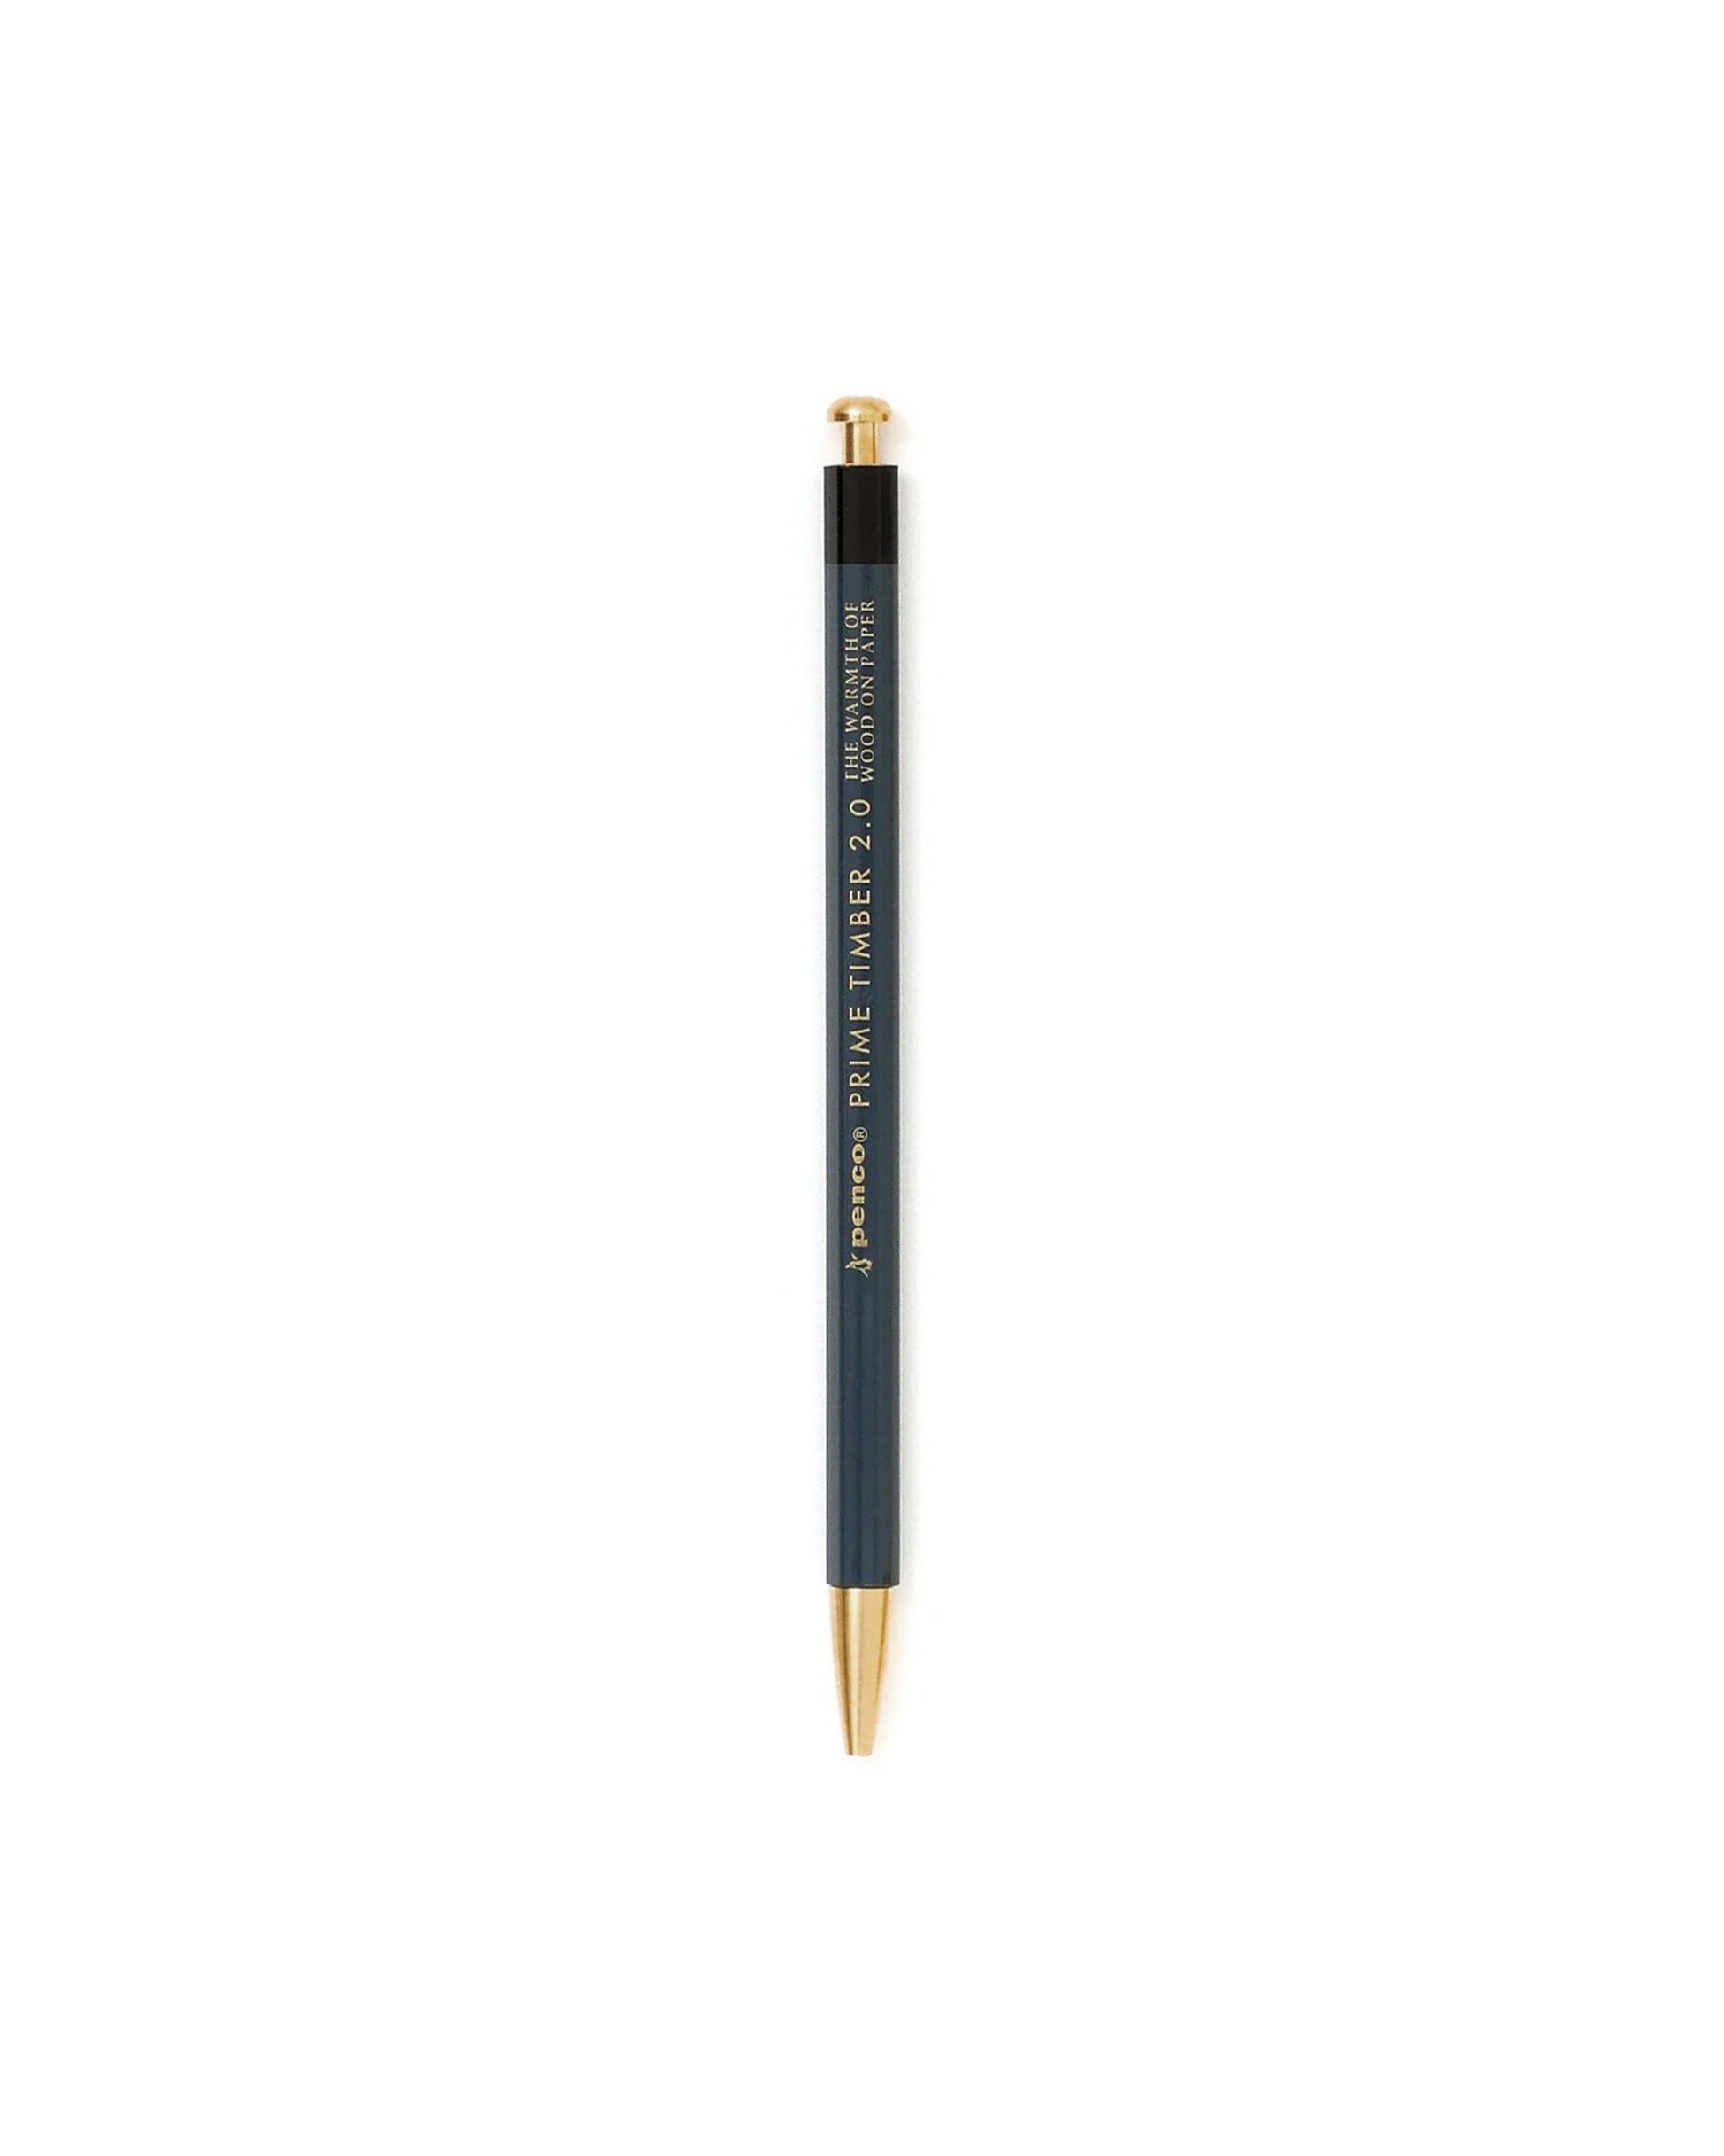 Black clutch pencil made with eco-friendly wood, Penco brand.